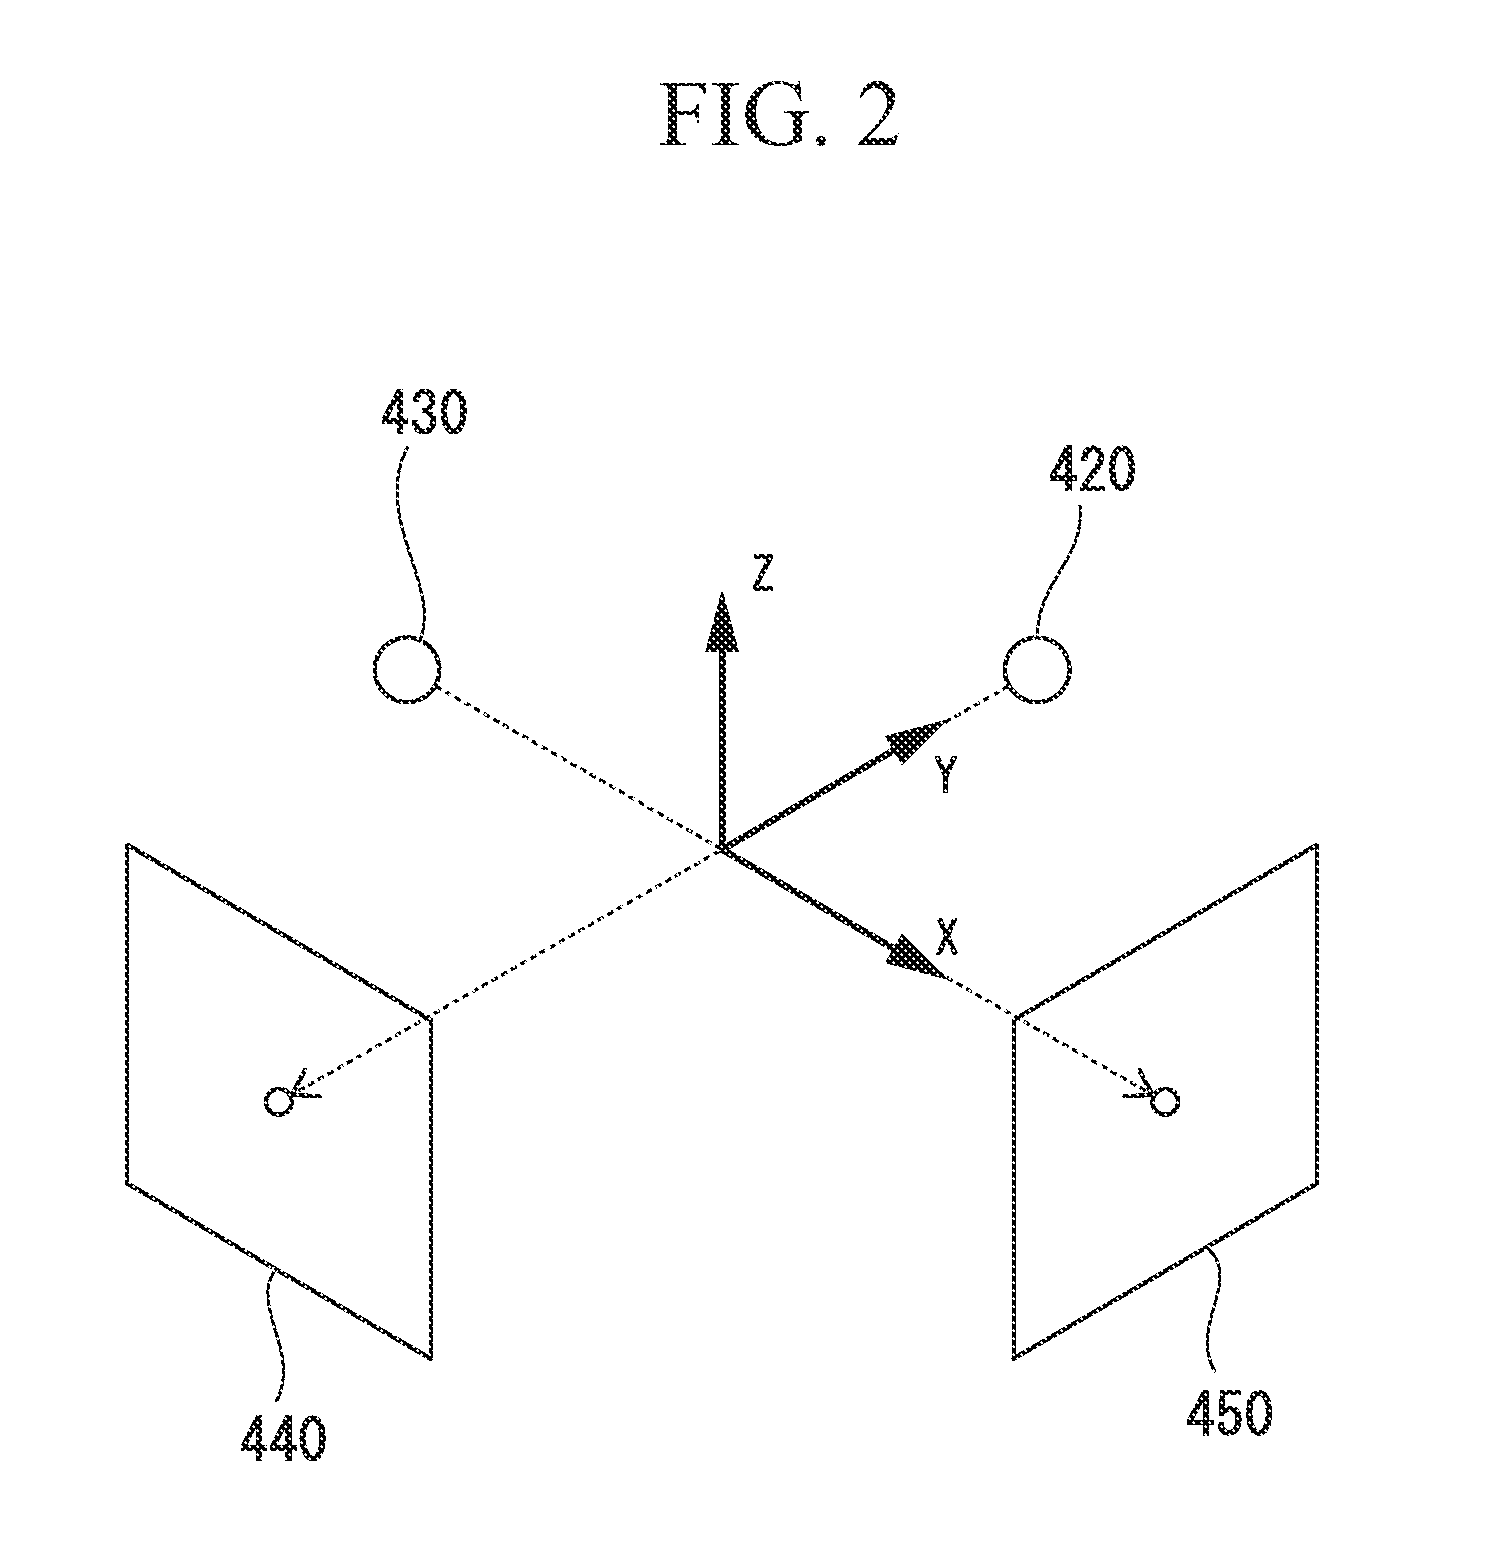 Image processor, treatment system, and image processing method